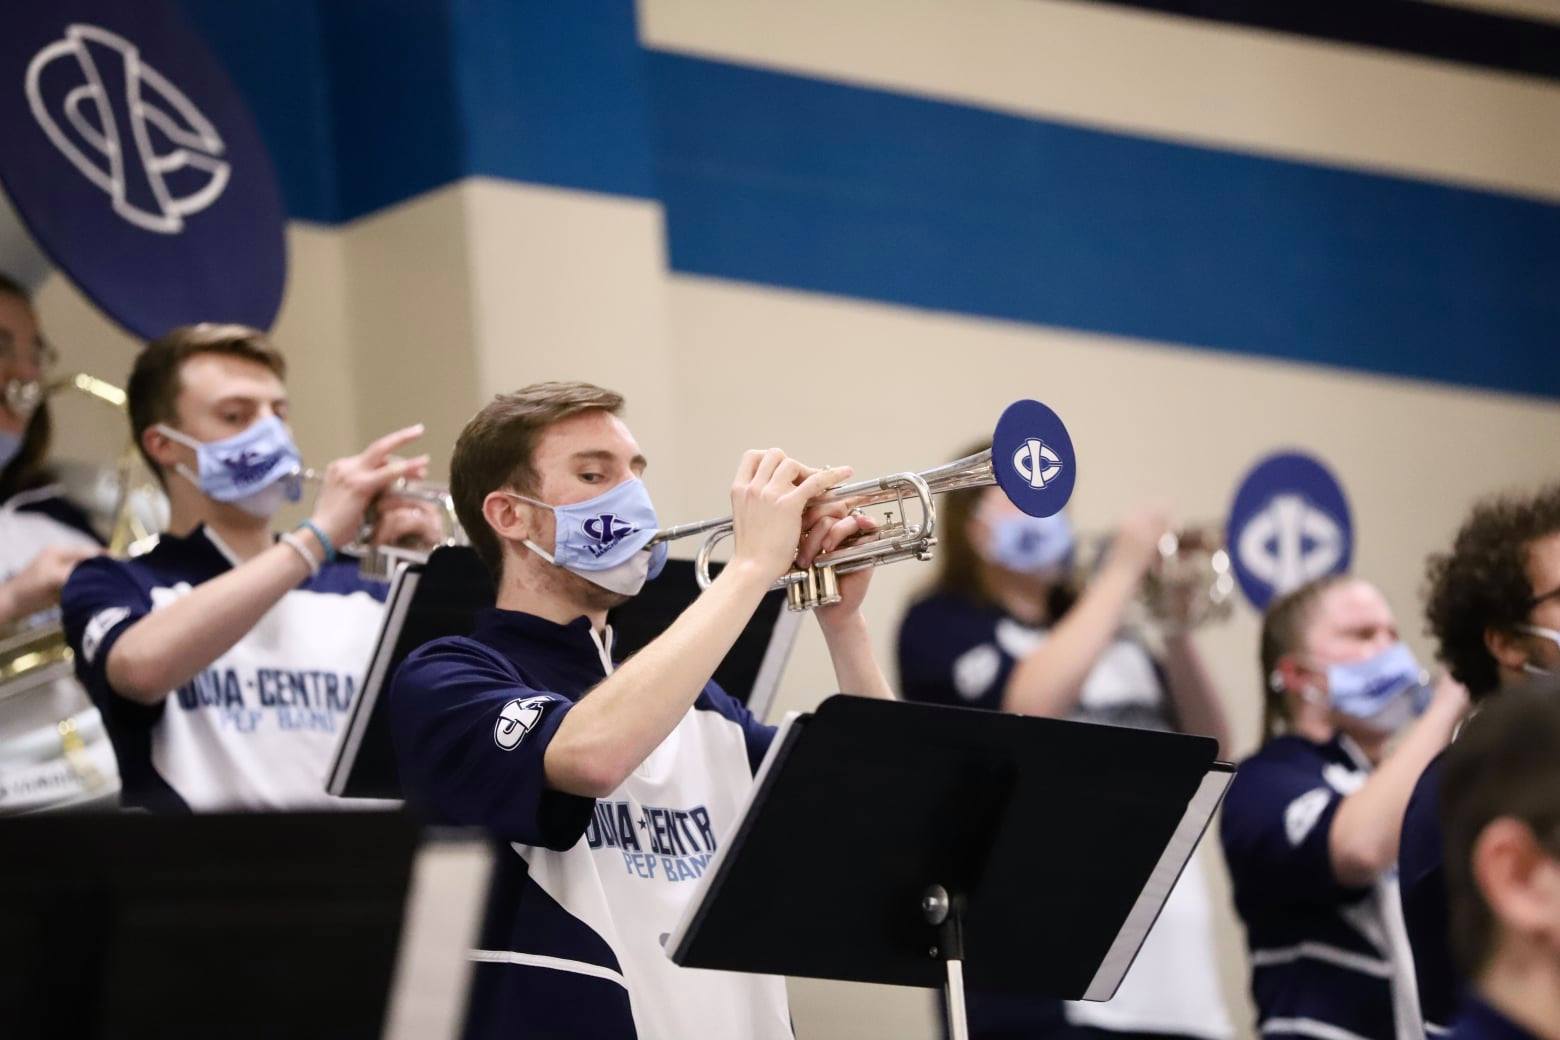 Triton band continues to bring the boom